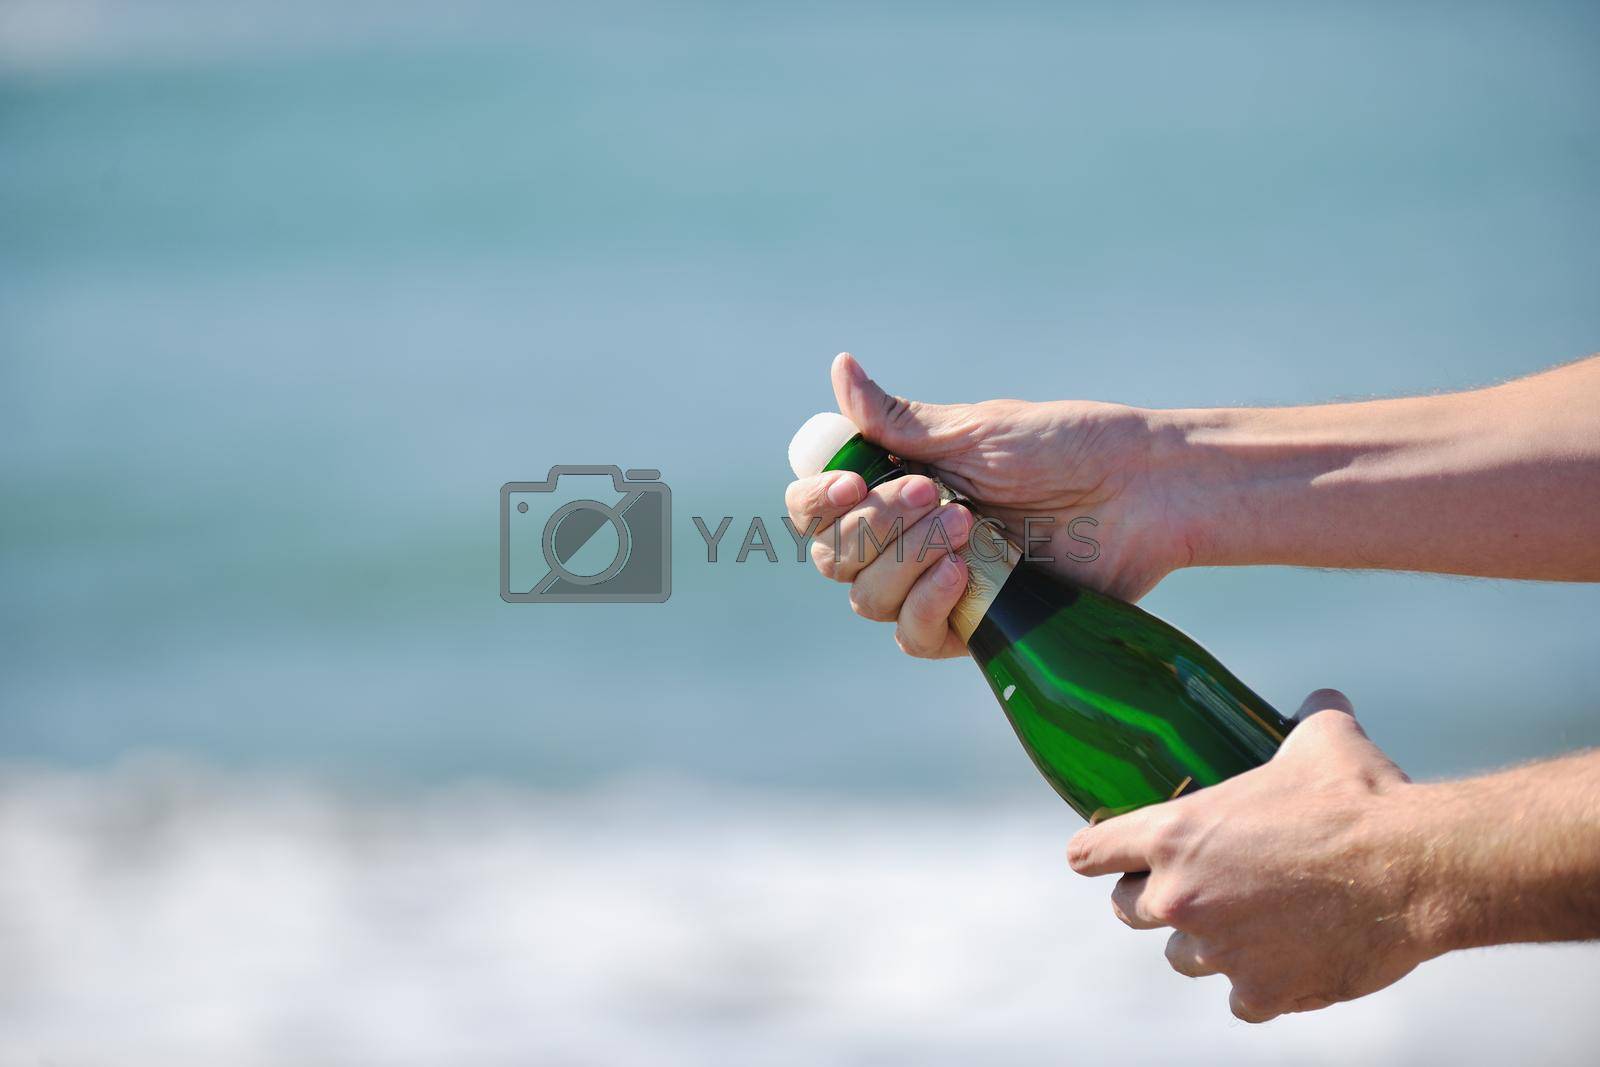 man hands open bottle of champagne alcohol and wine drink outdoor on party celebration event 